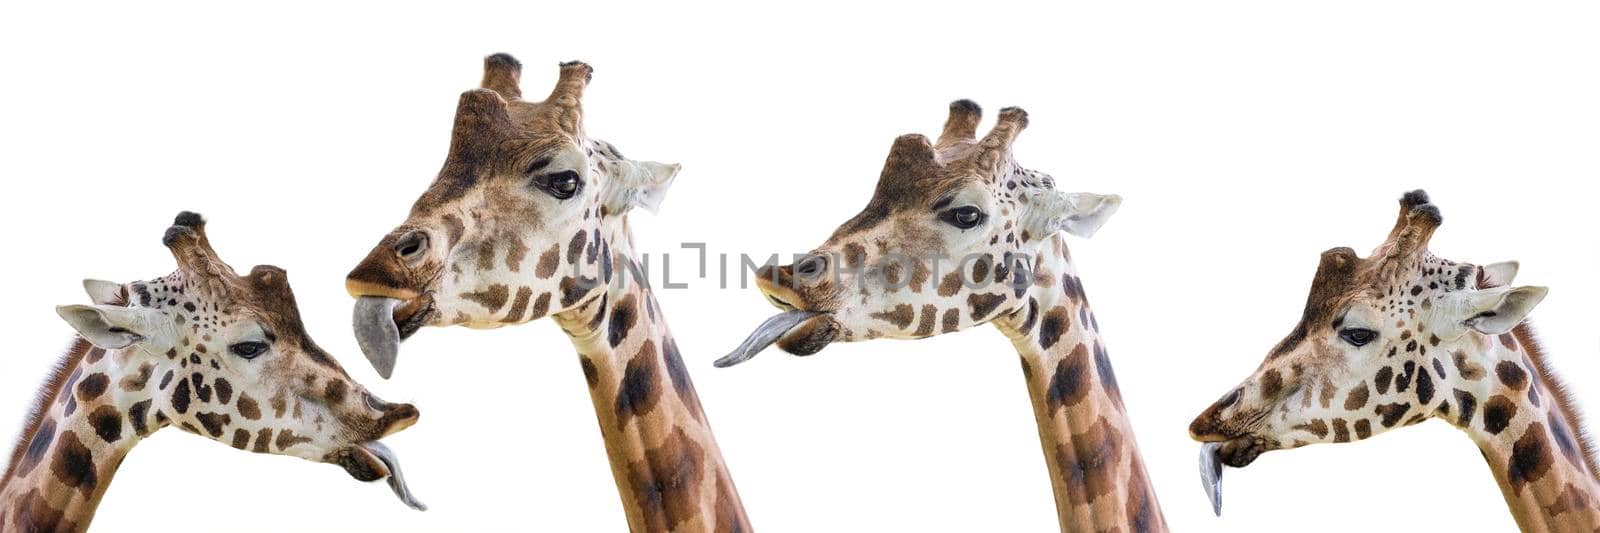 Giraffe shows a long tongue. Funny giraffe isolated on white background. Close-up of a giraffe's head with its tongue hanging out. by SERSOL